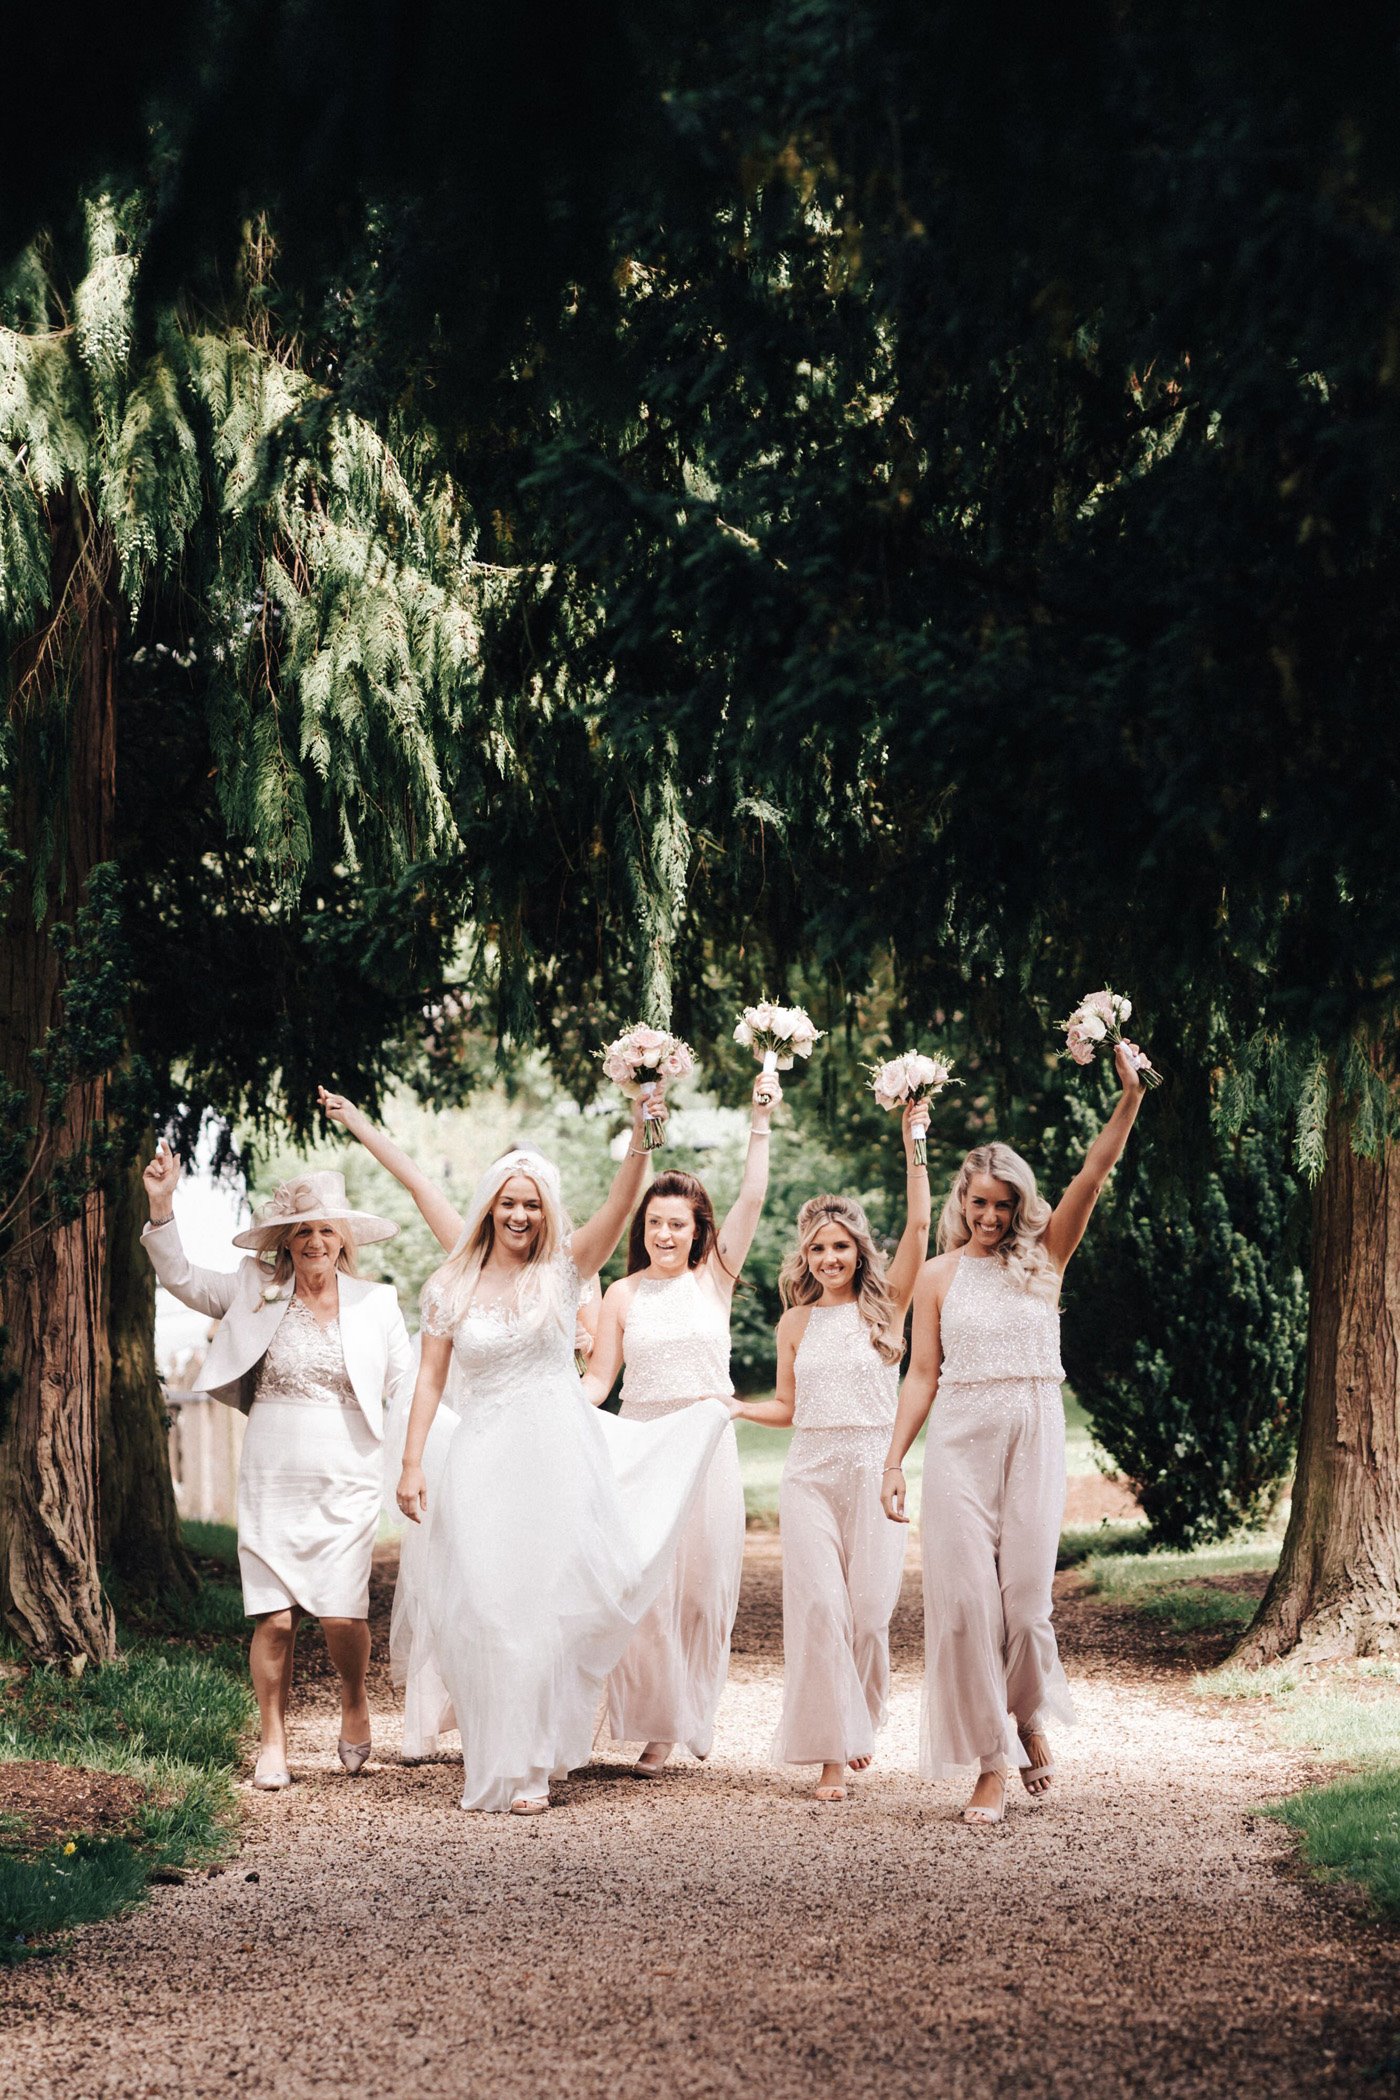 Bridesmaids and mother of bride walk up the path to the church holding bouquets in the air happily